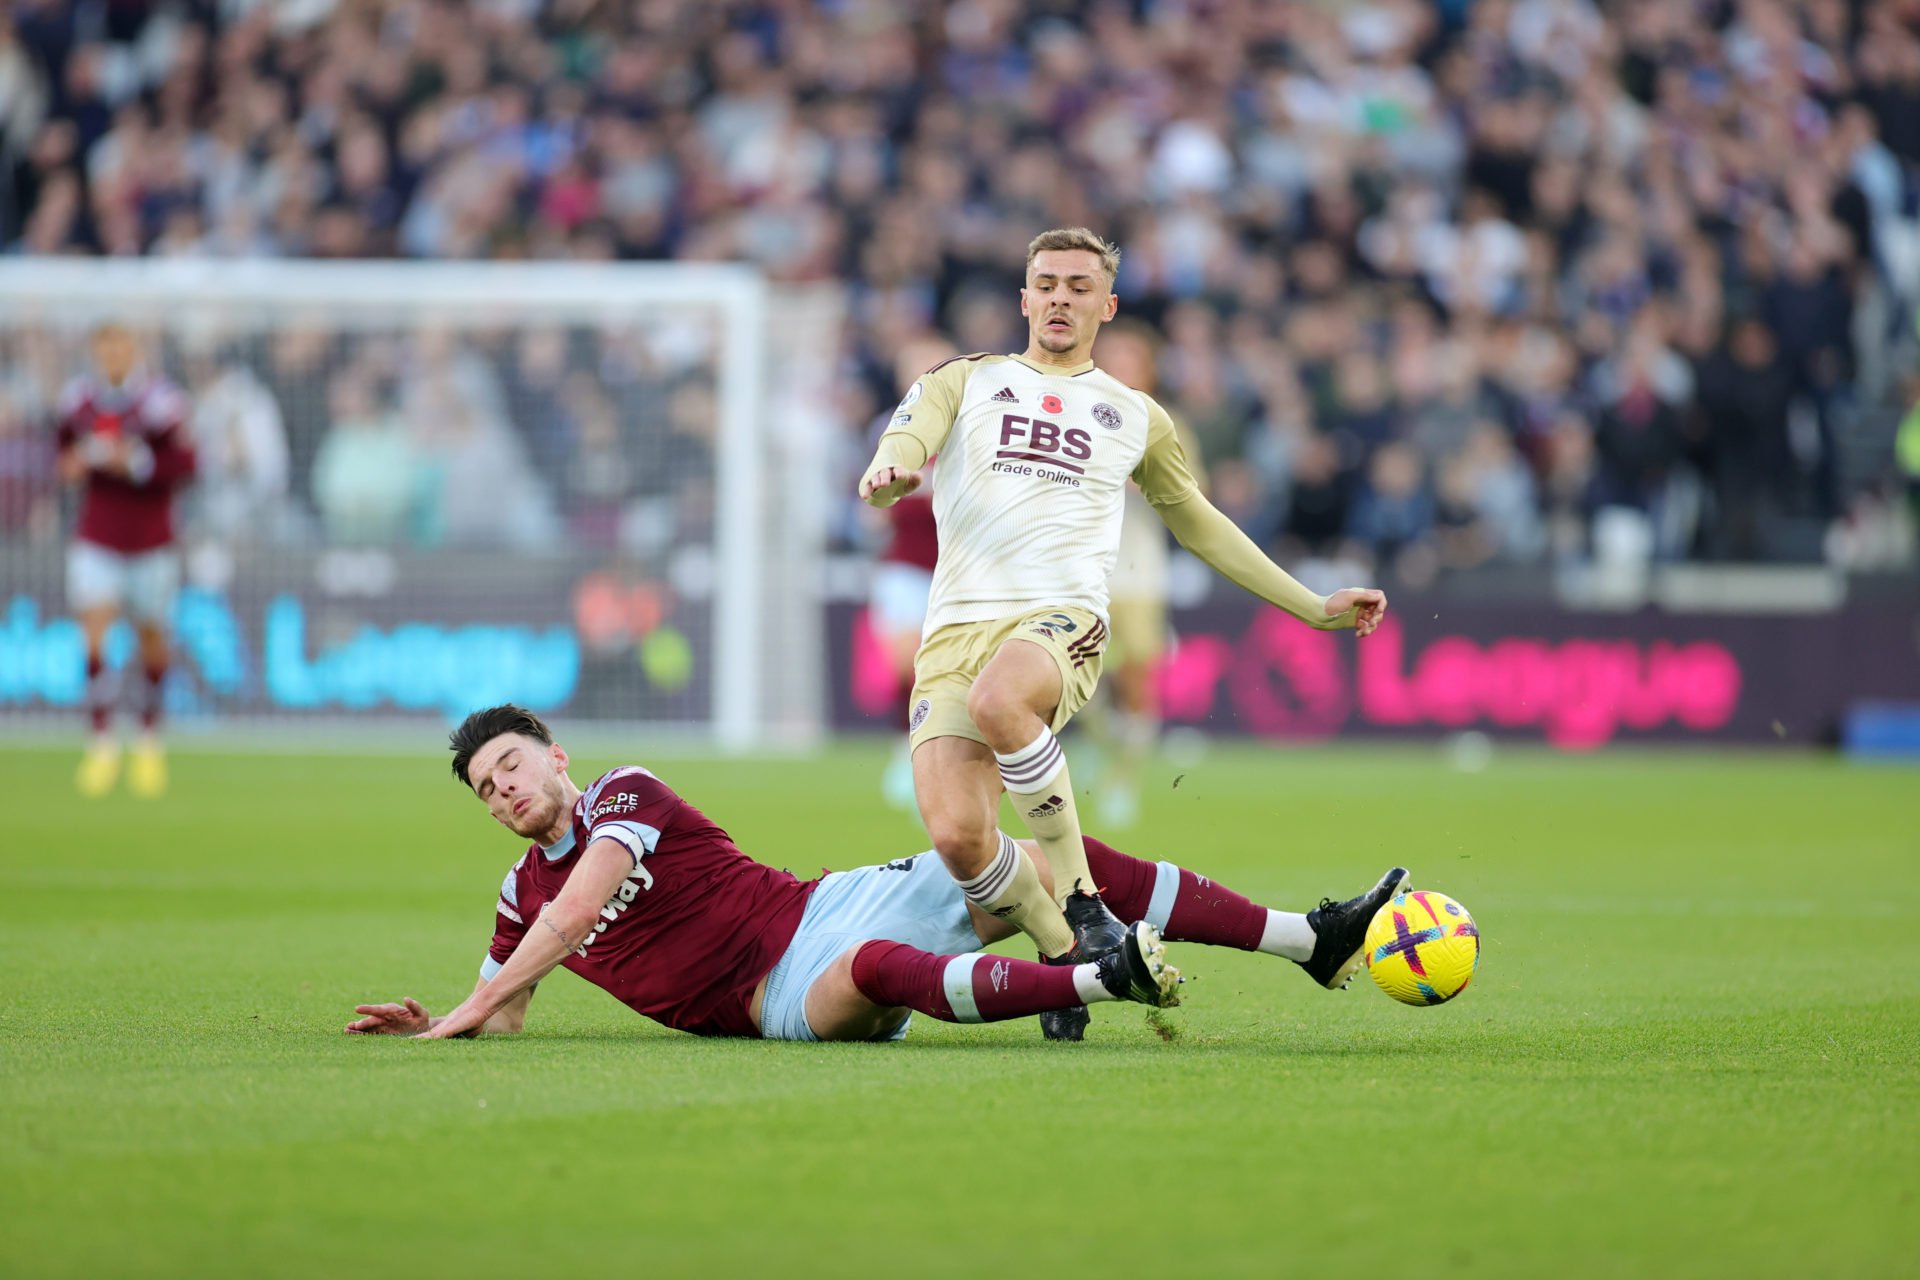 Insider claims Newcastle want to sign West Ham ace Declan Rice